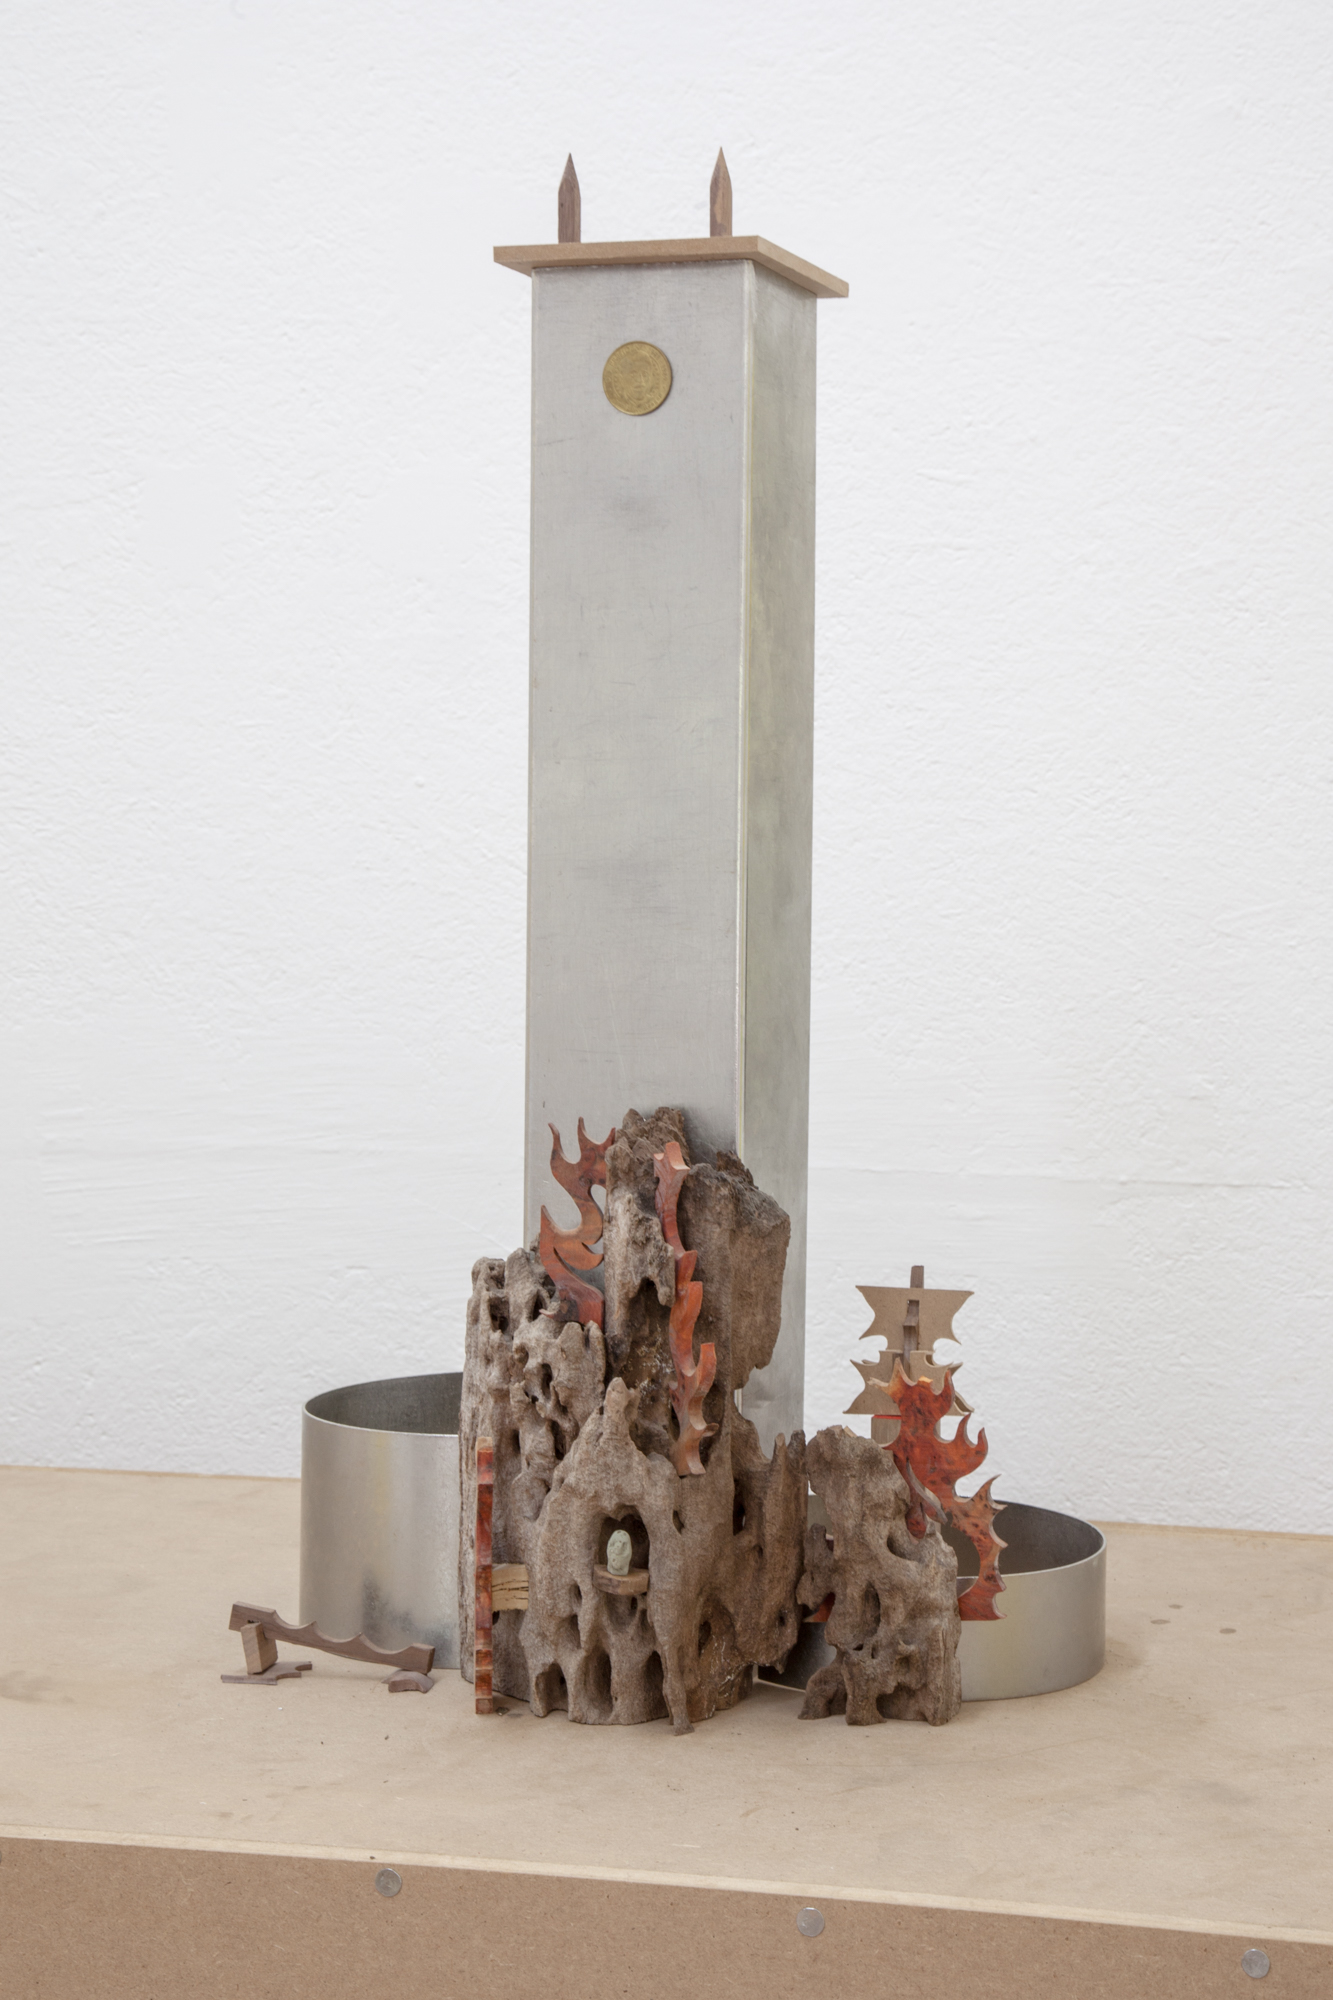  Harry Gould Harvey IV,  Reagan Klan , 2018, Foraged Wormy Apple Wood From Former Citibank™ Founder’s Estate, Clay Foraged, from Swans Island, Sunoco™ Millennium Commemorative Coins, Chakta Viga Burl, and Scrap Metal from Whole Foods™, 26 x 16 x 11 i